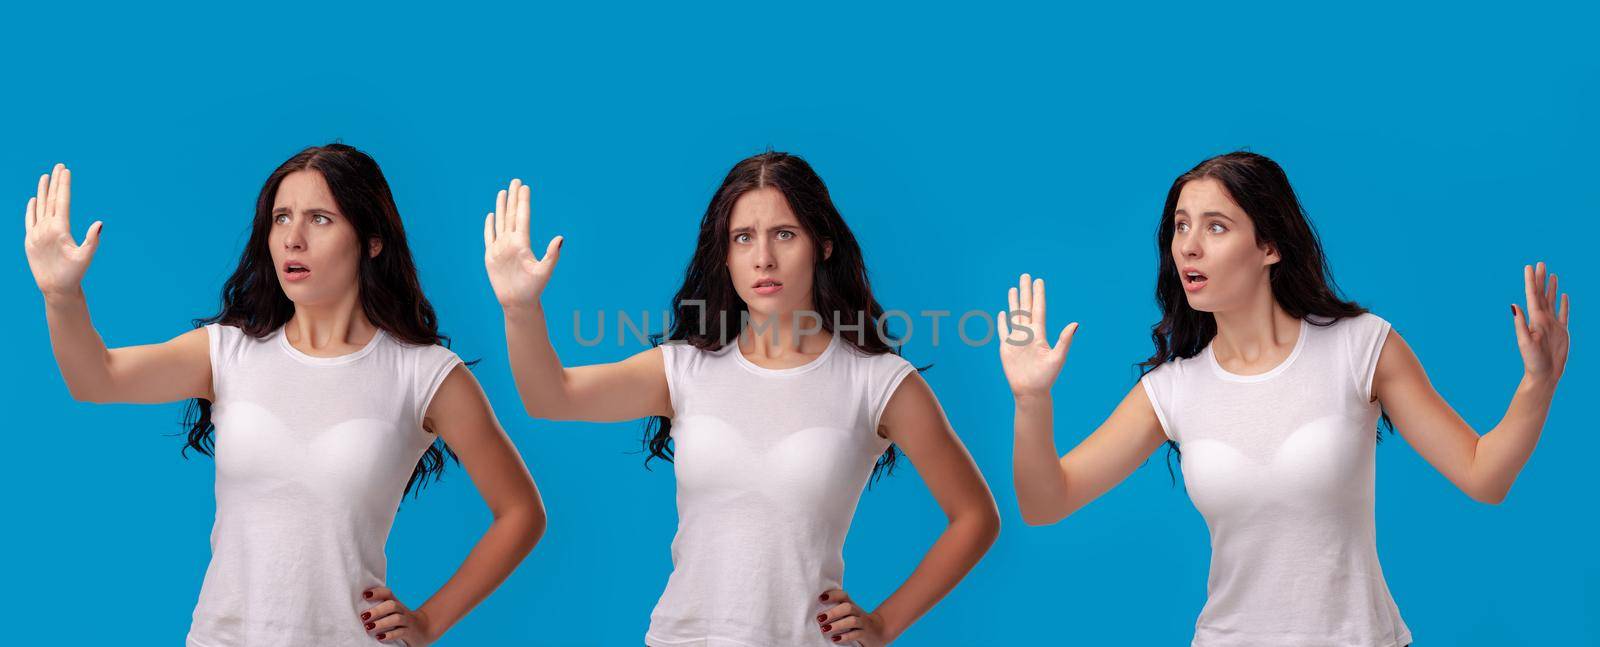 Close-up shot of a beautiful brunette woman in a white casual t-shirt posing against a blue studio background. She act like she is confused and trying to stop someone. Set of a people sincere emotions. Copy space.